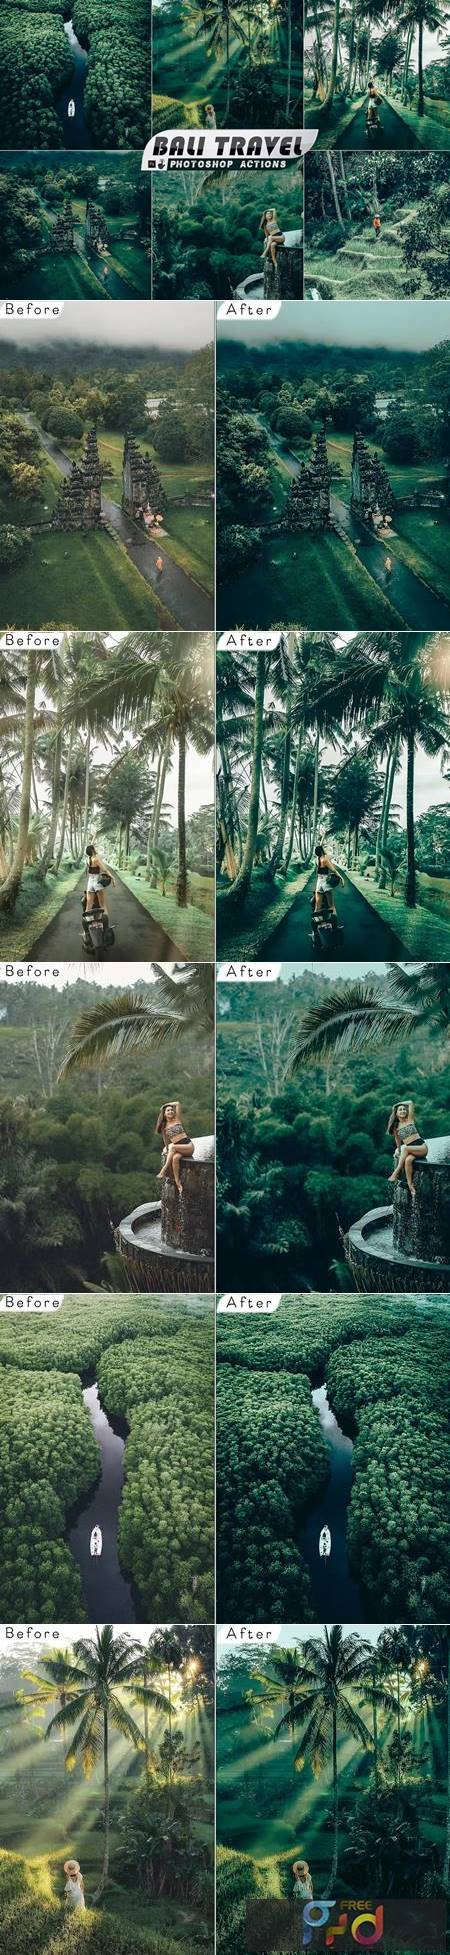 Bali Travel Photoshop Actions 239A4HB 1